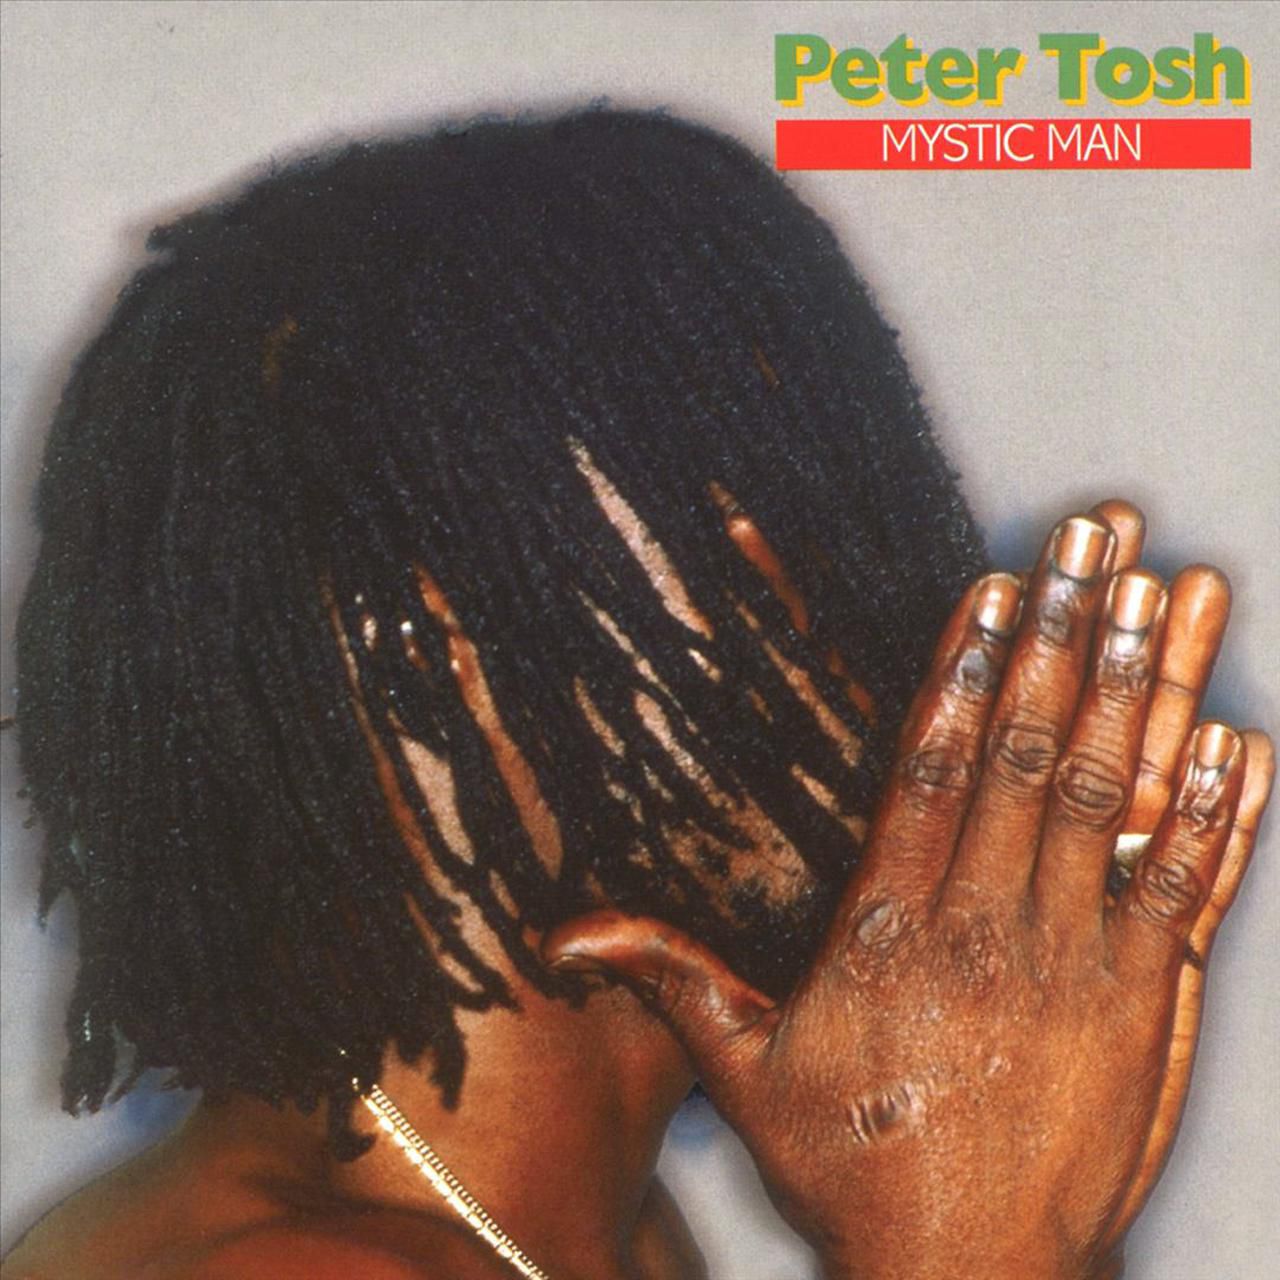 Profile and Biography of Reggae Legend Peter Tosh